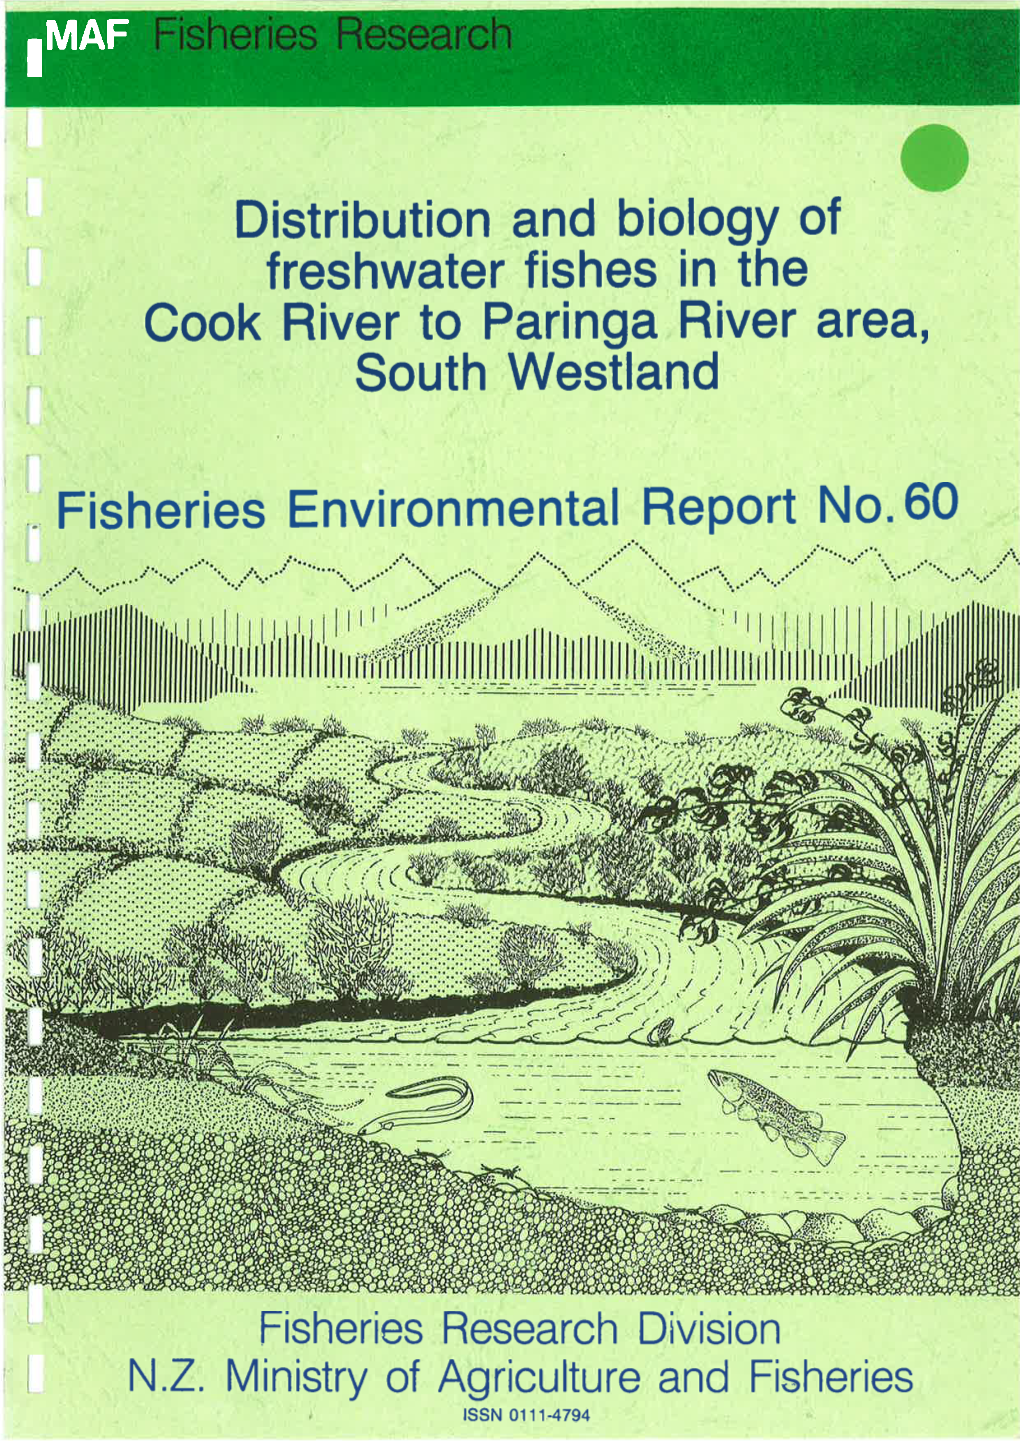 Distribution and Biology of Freshwater Fishes in the Cook River to Paringa River Area, South Westland